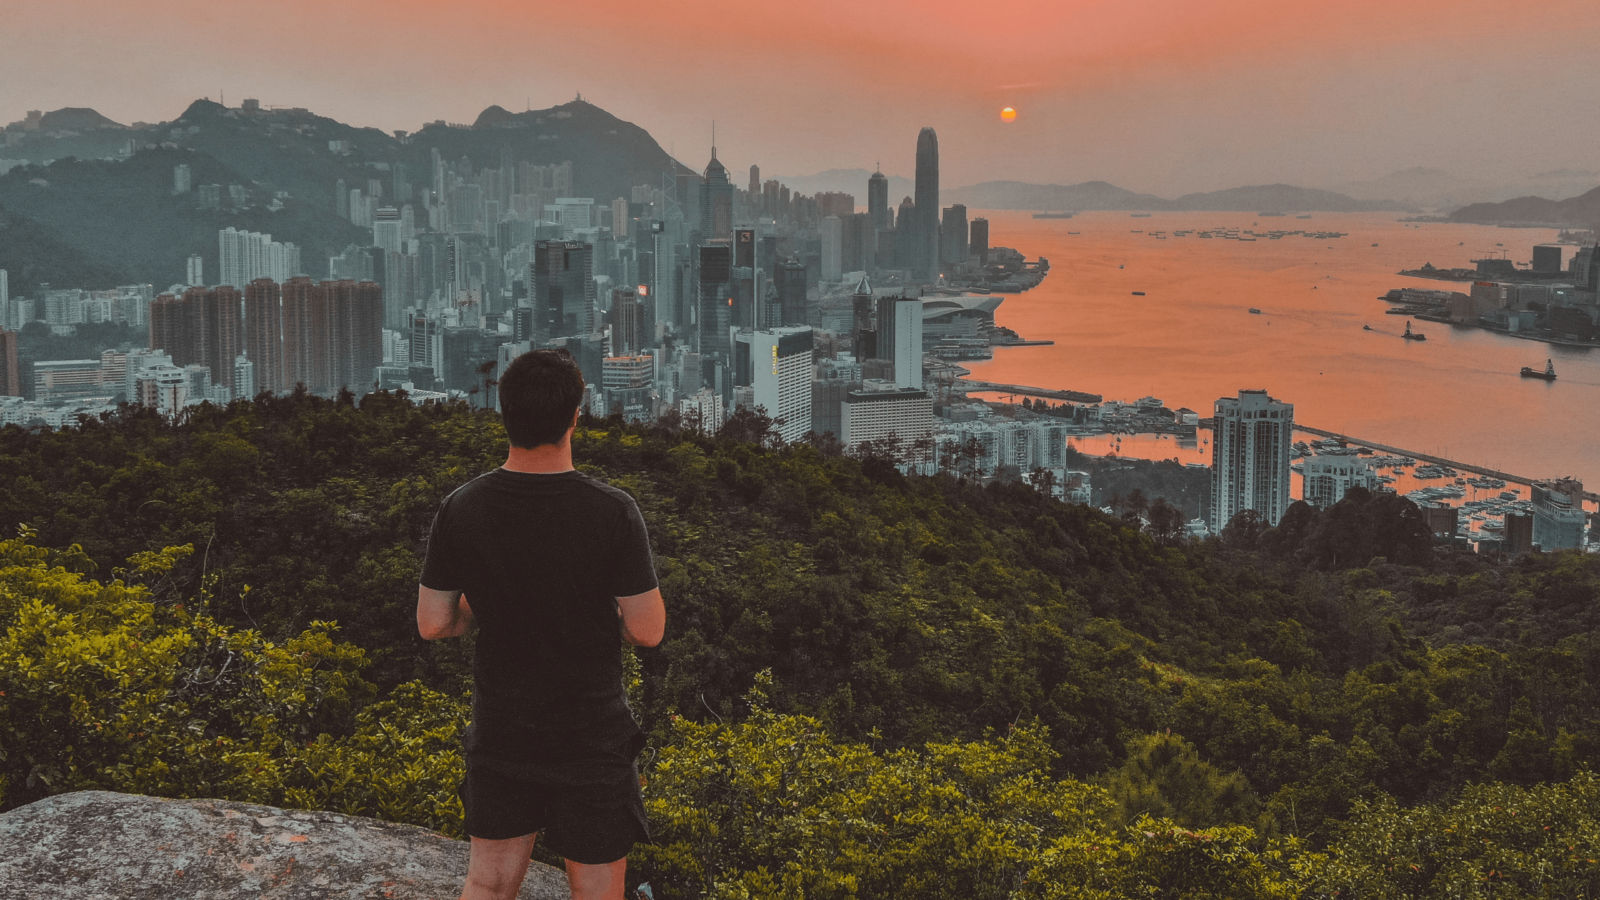 Hiking in Hong Kong: What to eat and drink to stay on top of your game